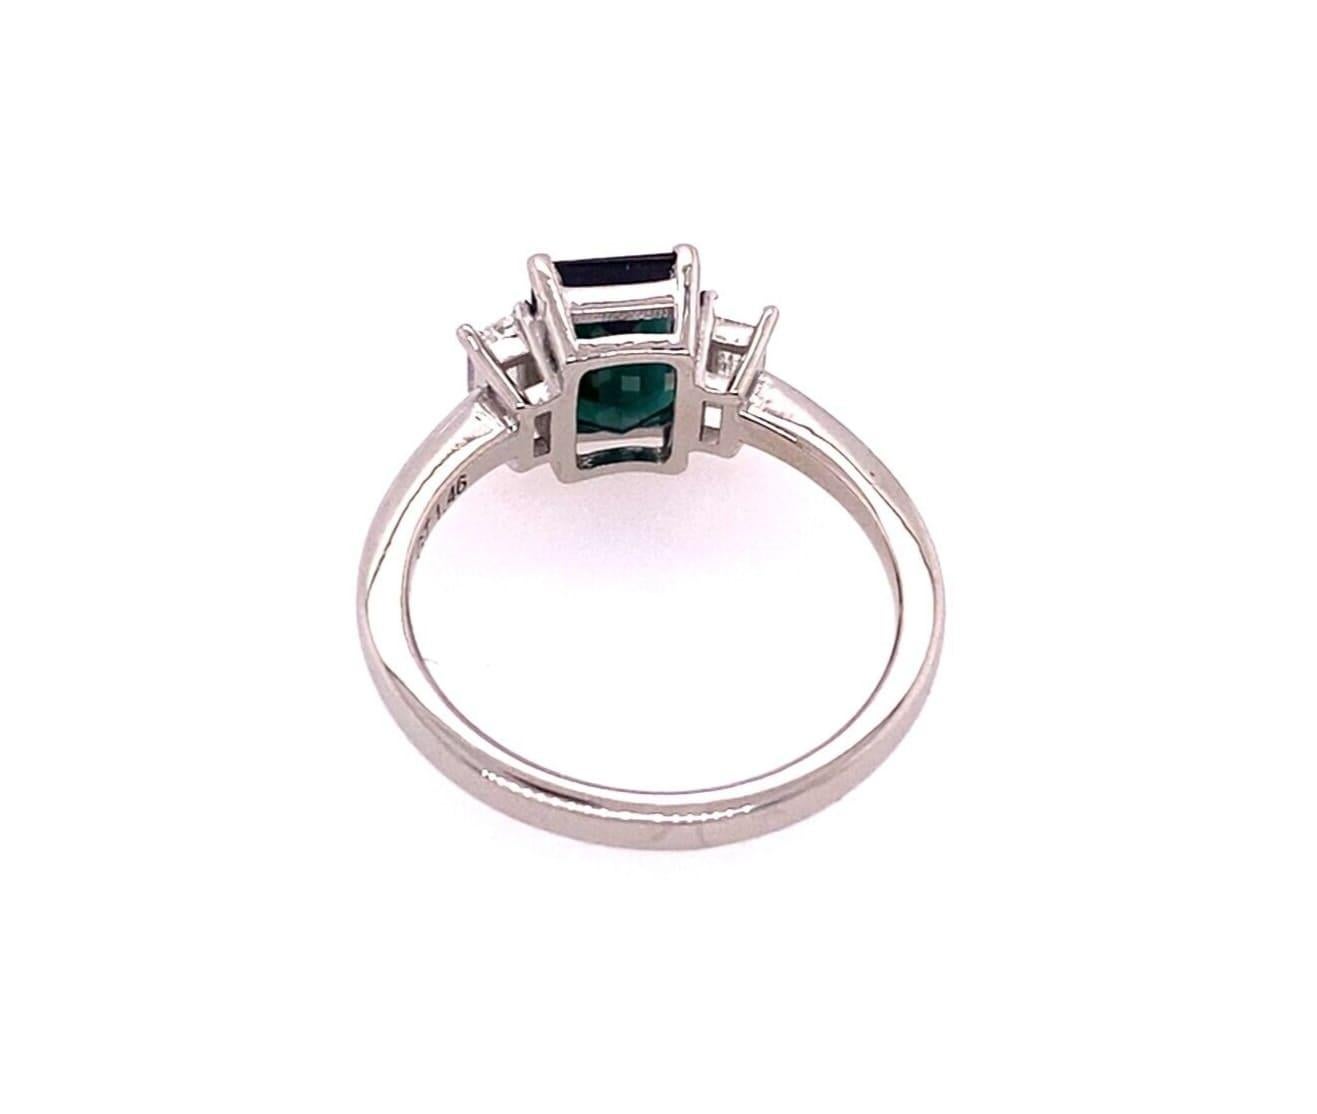 1.46ct Emerald Cut Green Tourmaline with Matching Baguette Diamonds 3-Stone Ring For Sale 1